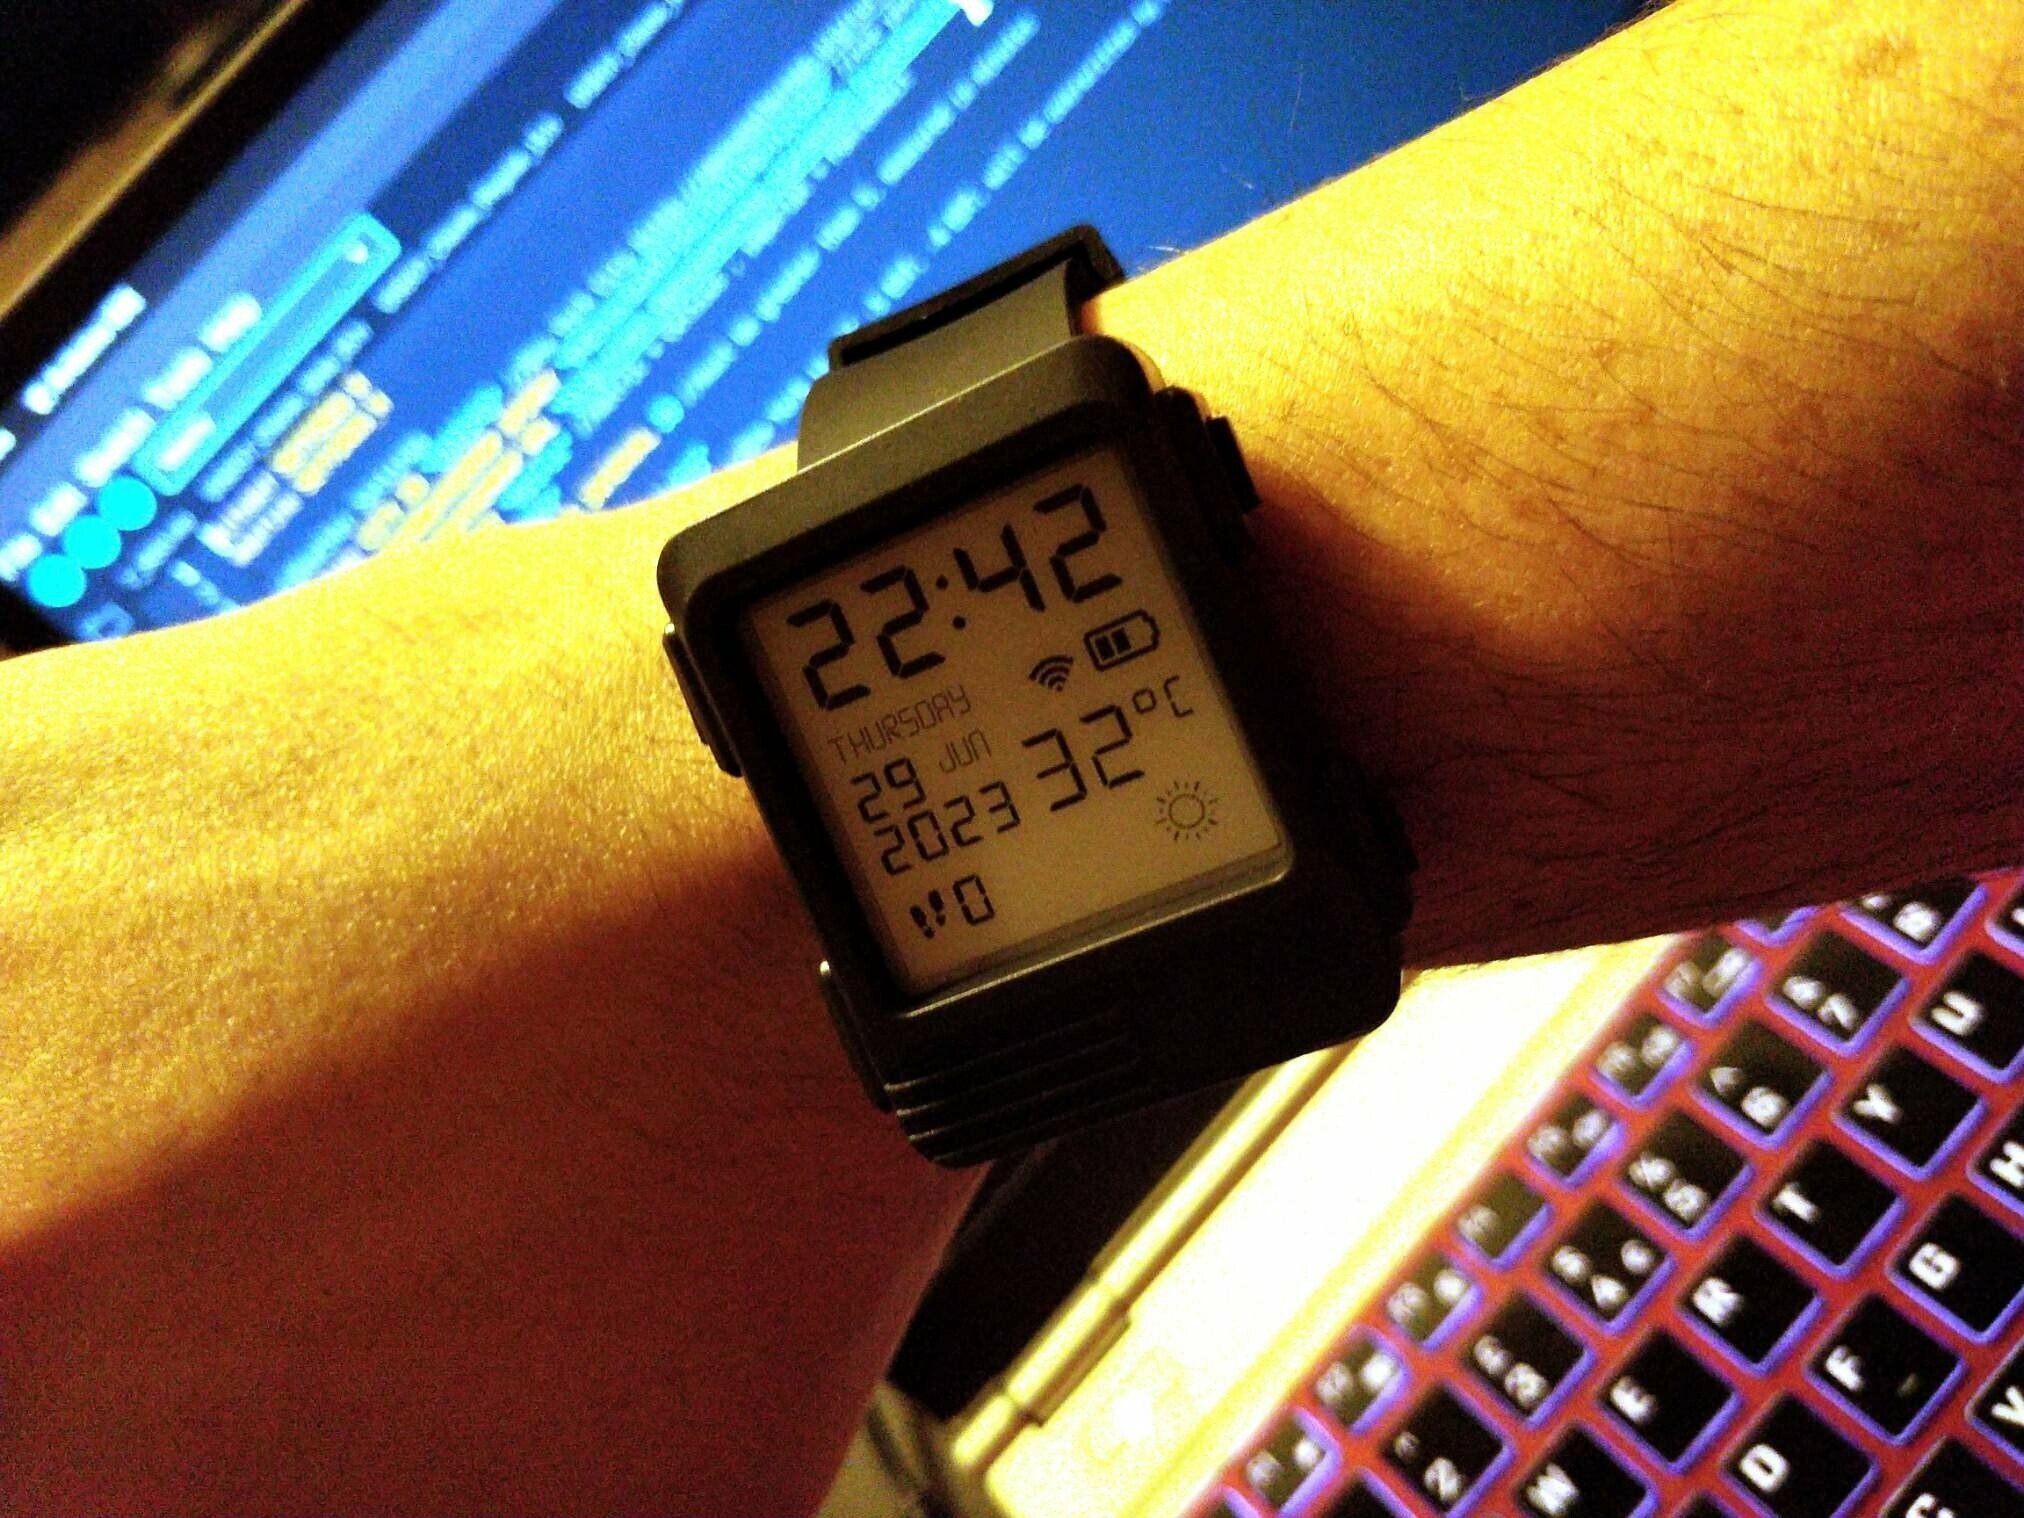 A watch showing the correct time. There is some blurred code on the computer screen behind it.